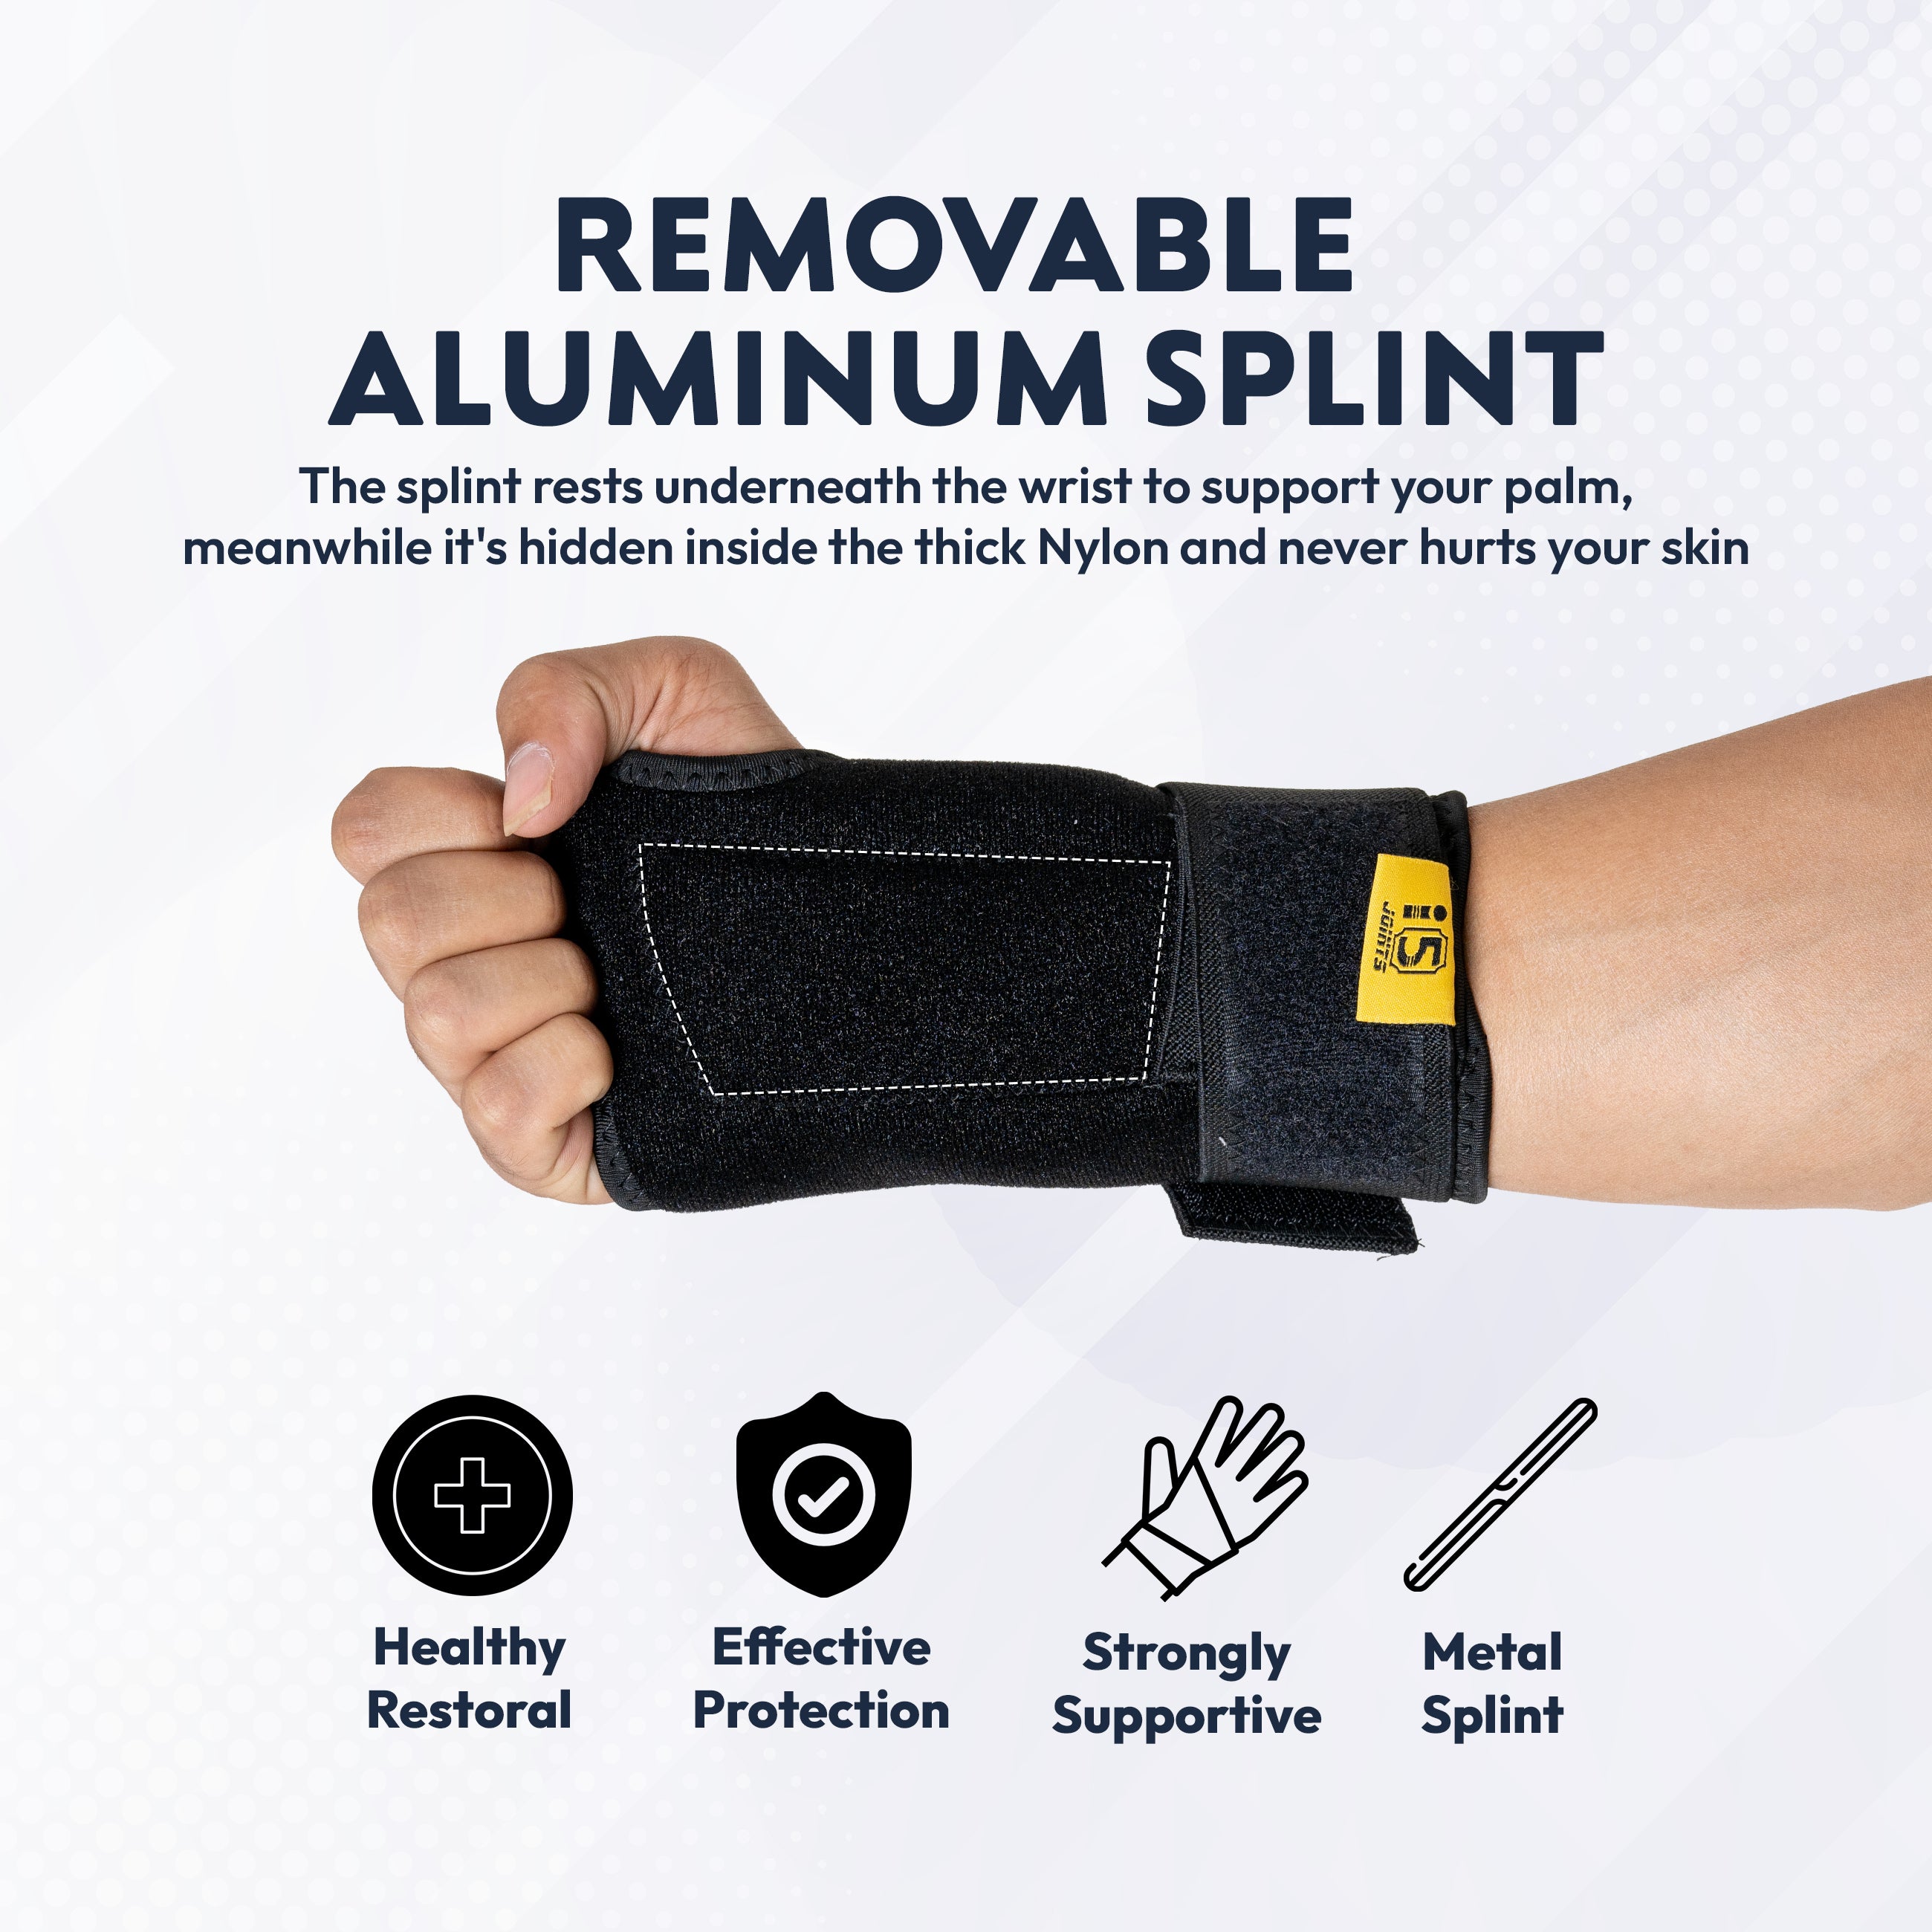 I5-Support-Gloves(Carpal Tunnel Gloves,Joint Pain Relief,Fingerless Compression,Compression Therapy,Anti-Arthritis,Finger Compression,Hand Pain Relief Gloves,Wrist Compression)